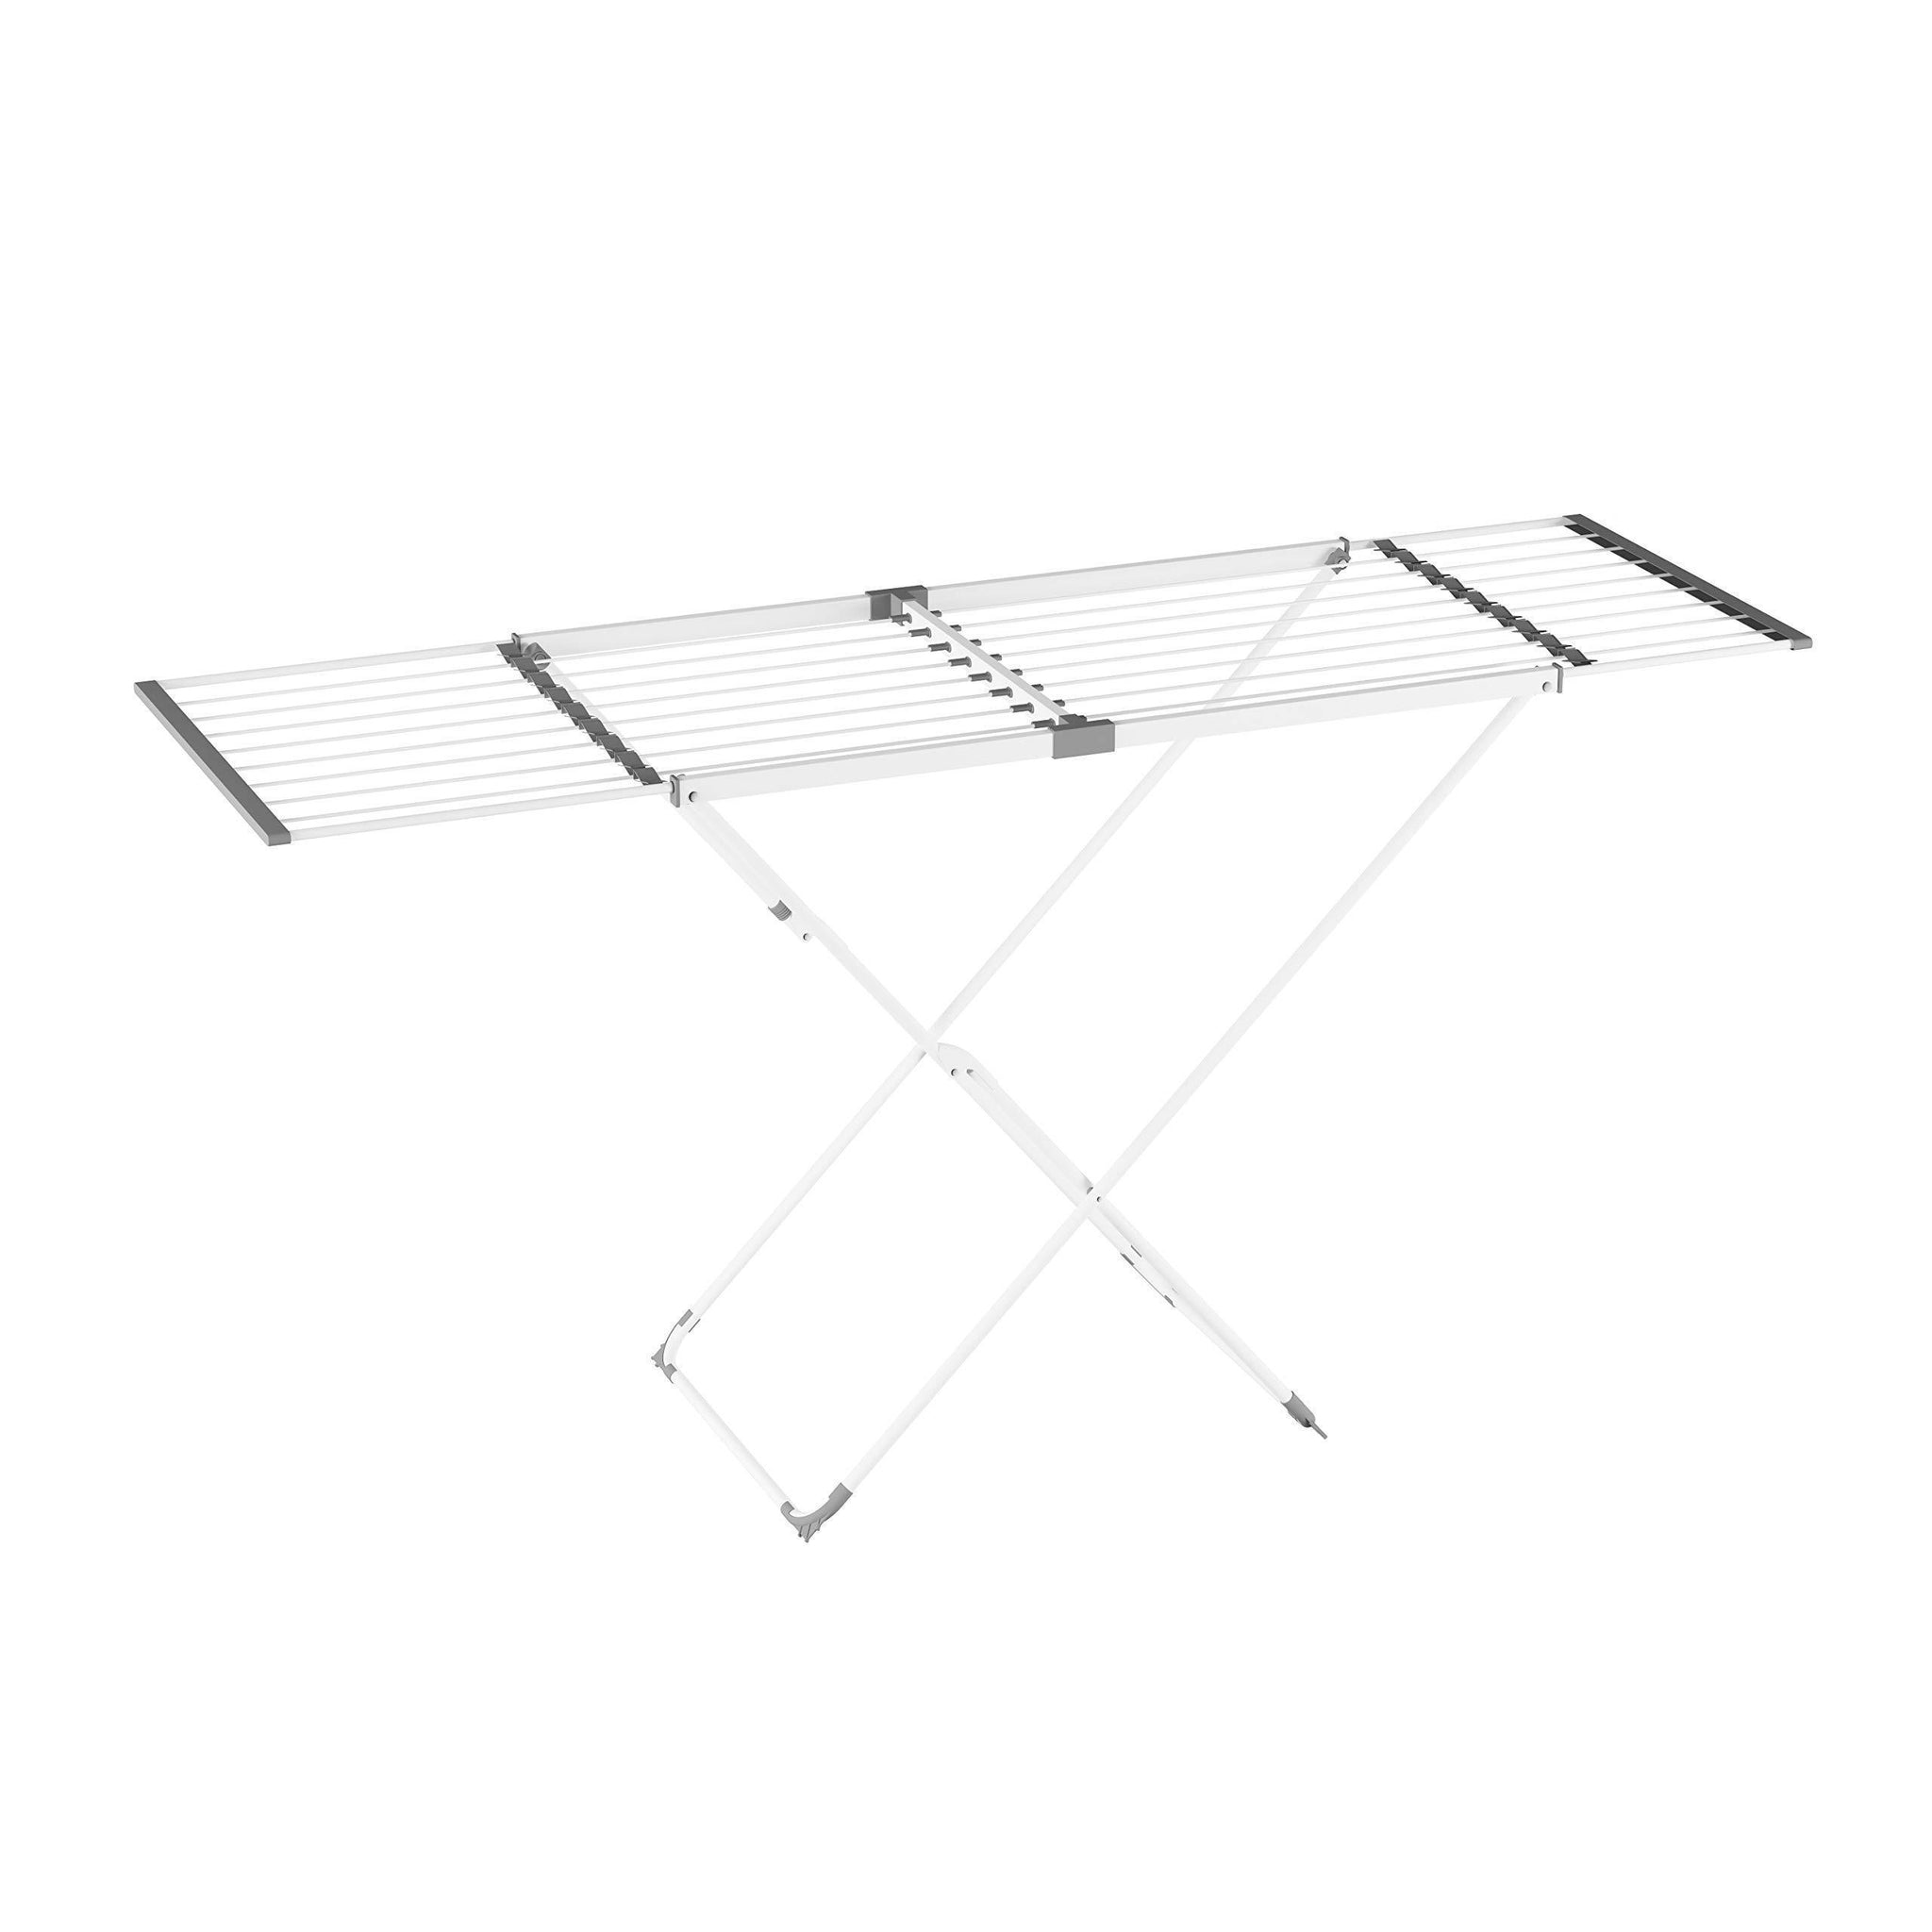 Lavish Home Extendable Clothes Drying Rack – Telescoping Laundry Sorter with Rust Resistant Metal X-Frame for Folding and Hanging Garments